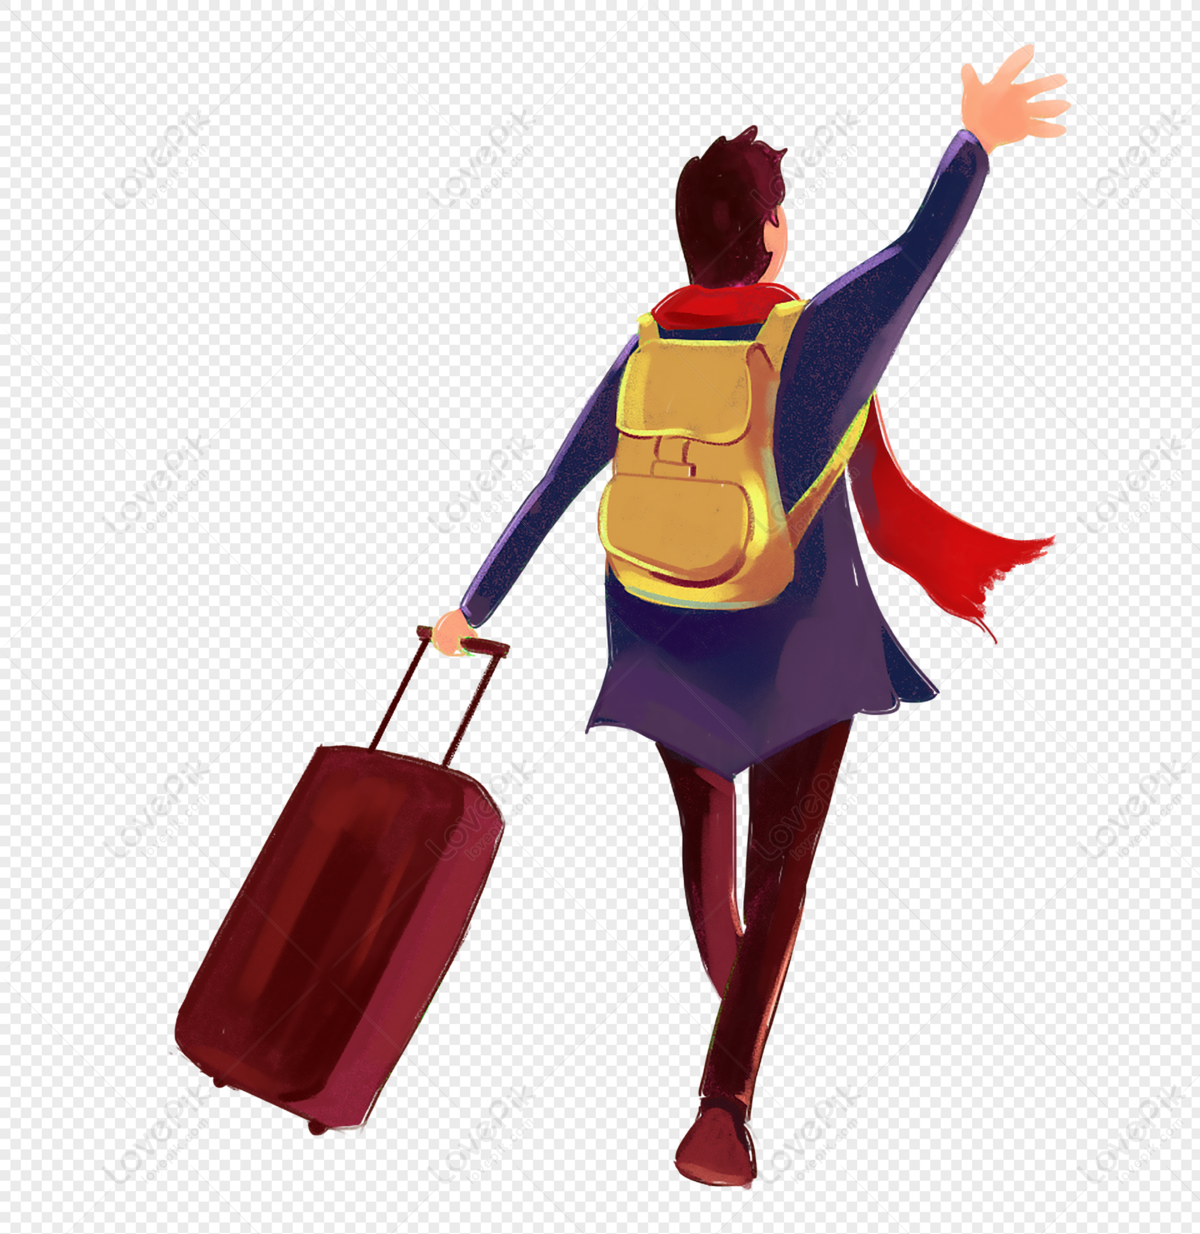 say goodbye and travel boy, say, work travel, people goodbye png transparent background